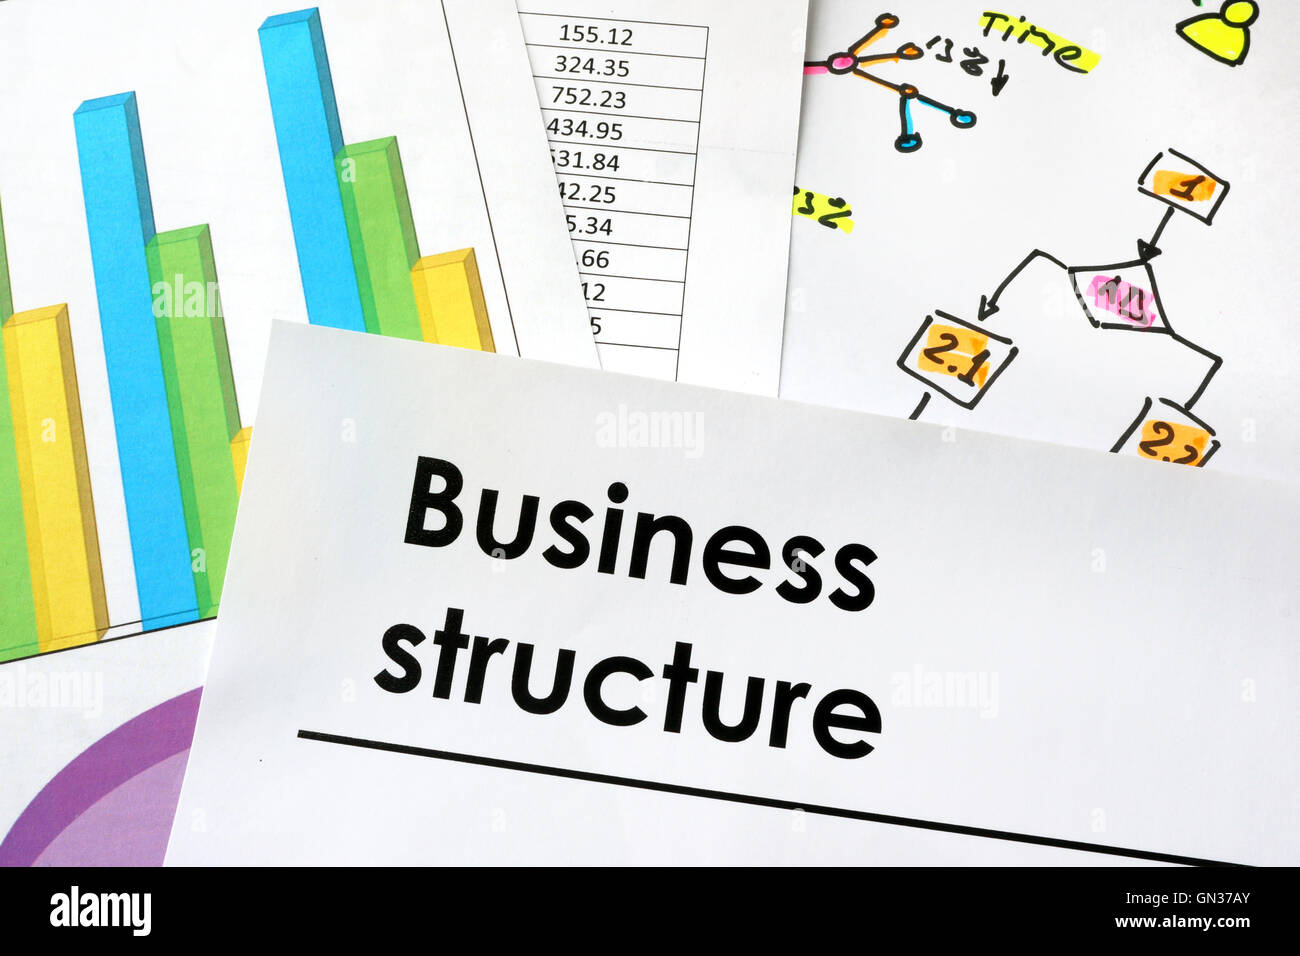 Business structure sign written on a paper. Stock Photo